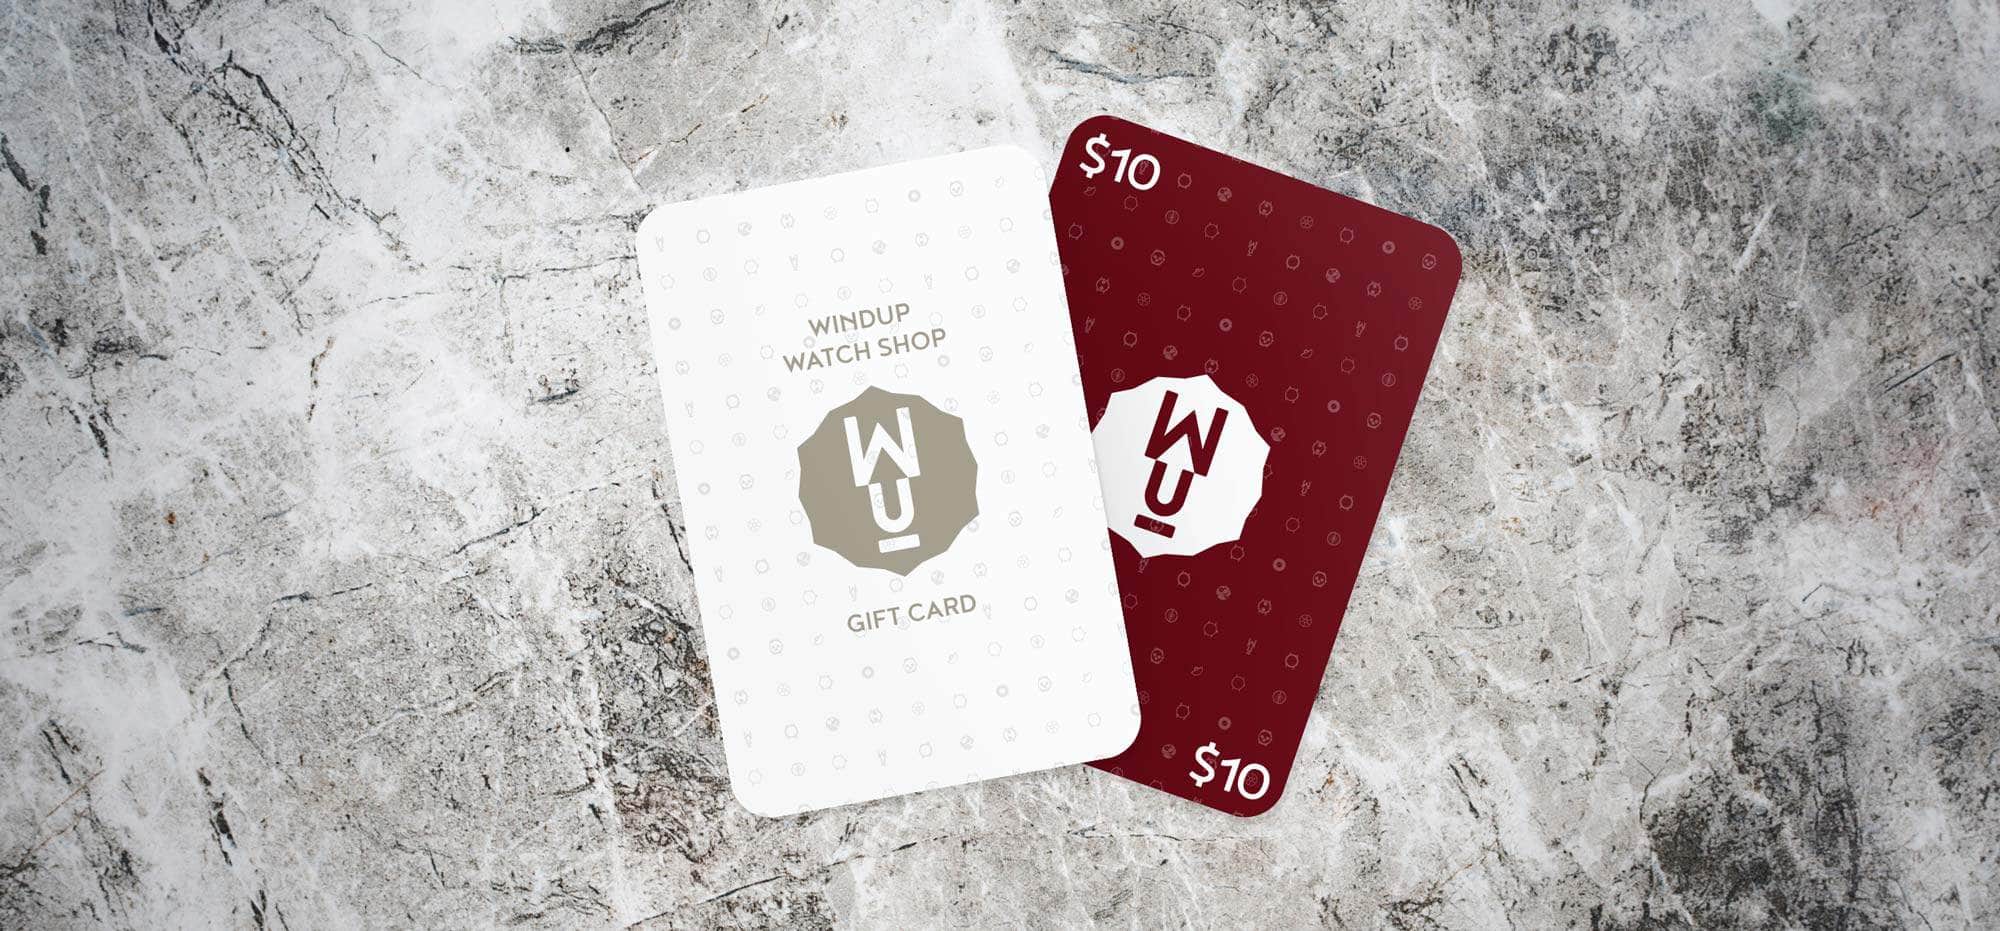 Windup Watch Shop Gift Cards Gift Card